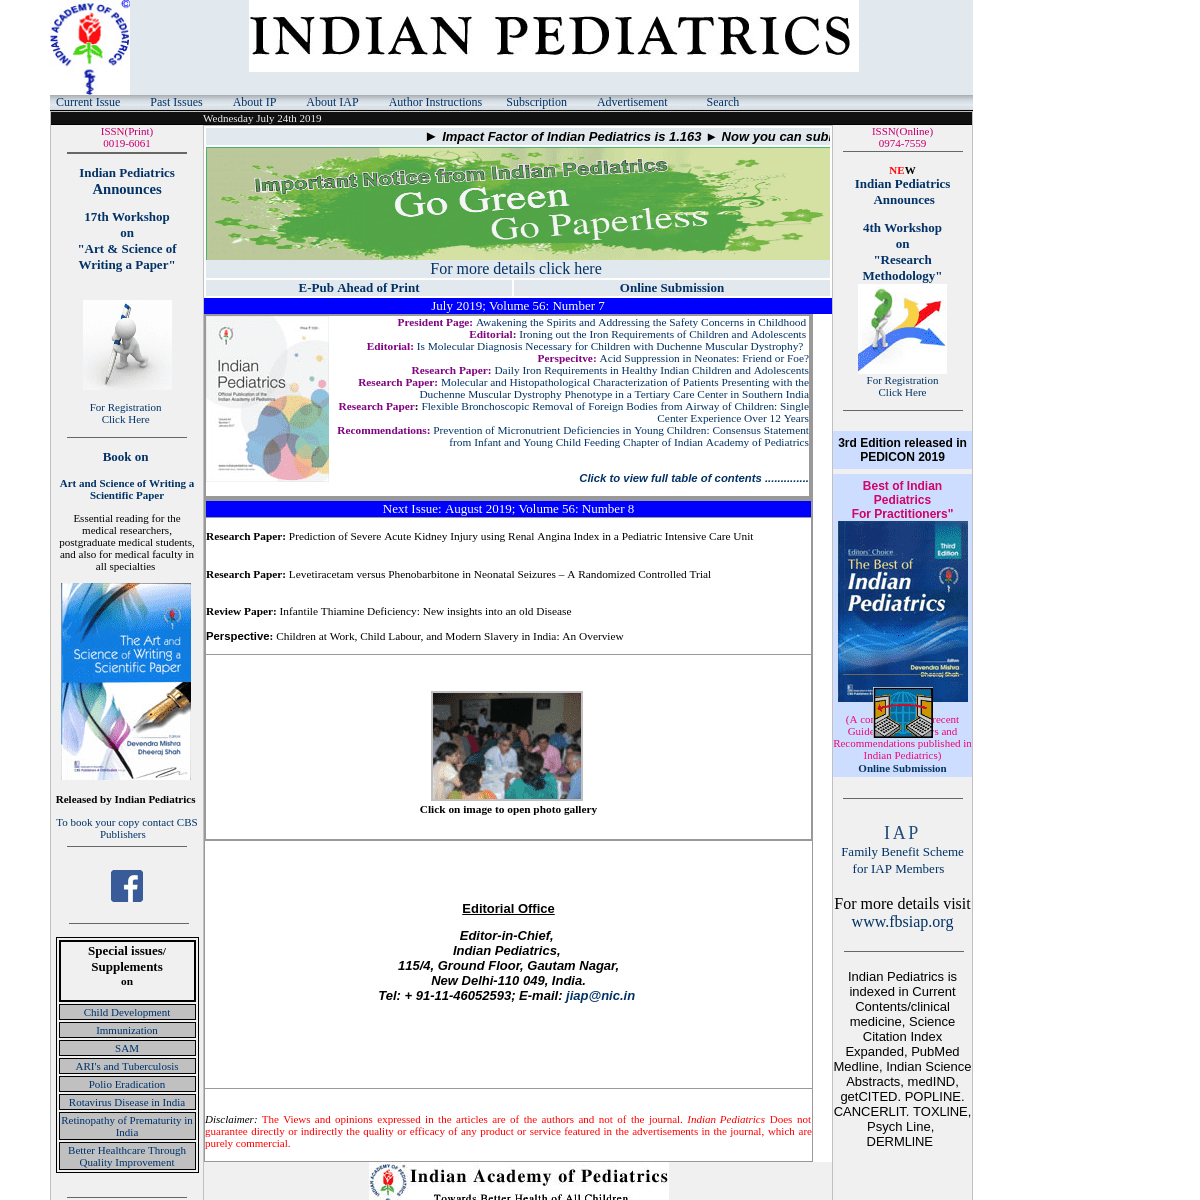 A complete backup of indianpediatrics.net